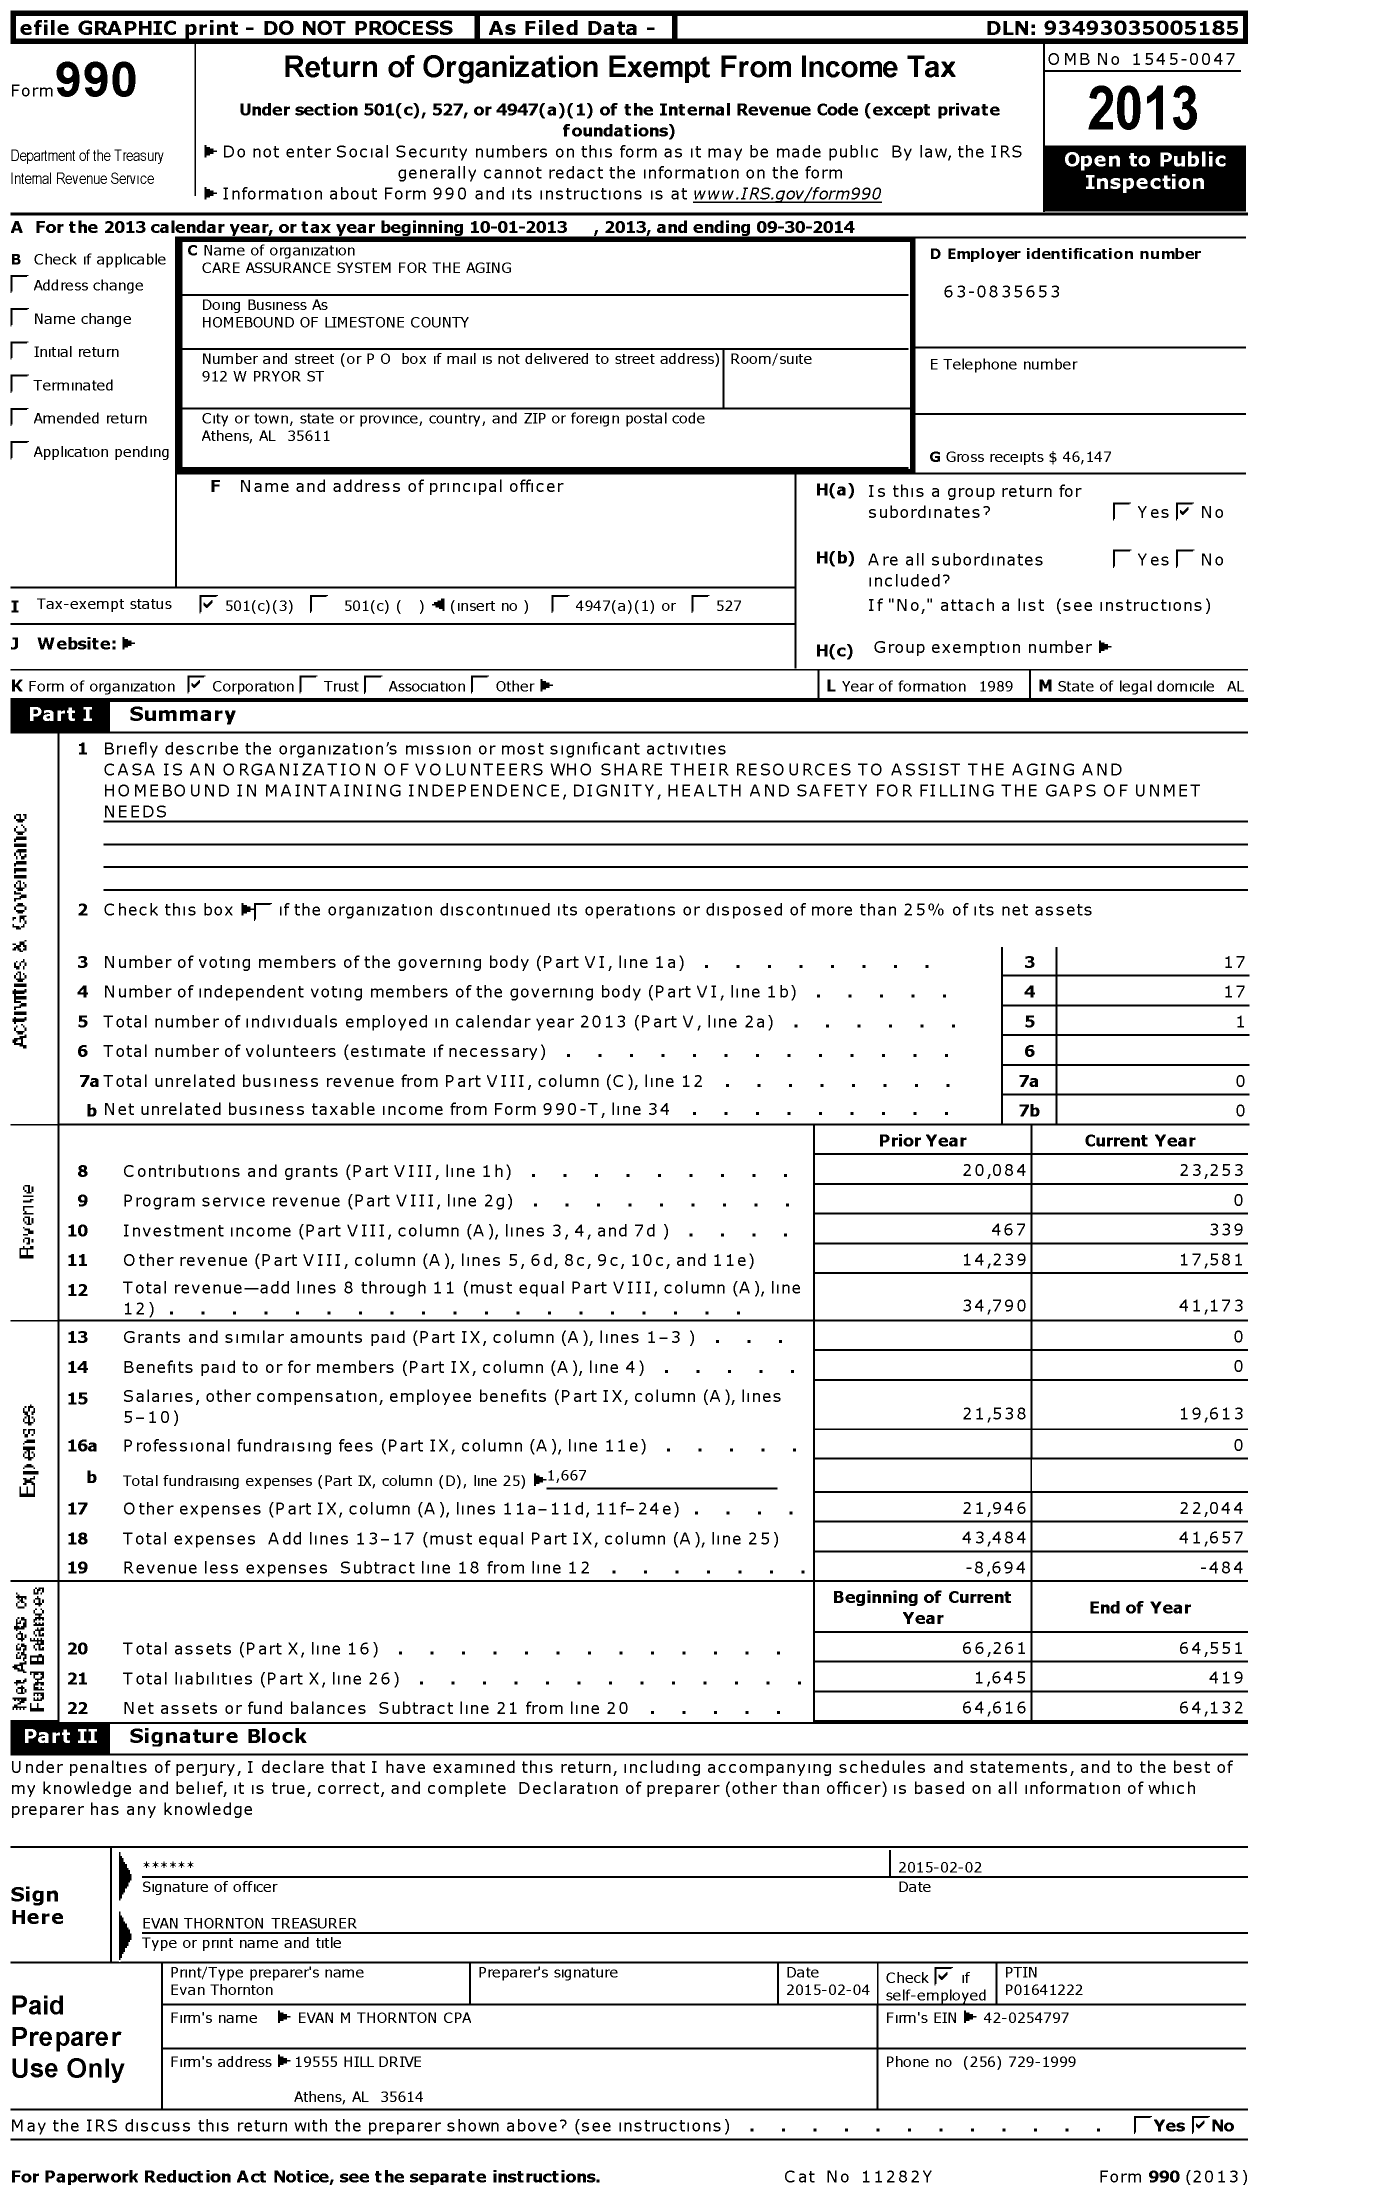 Image of first page of 2013 Form 990 for Care Assurance System for the Aging and Homebound